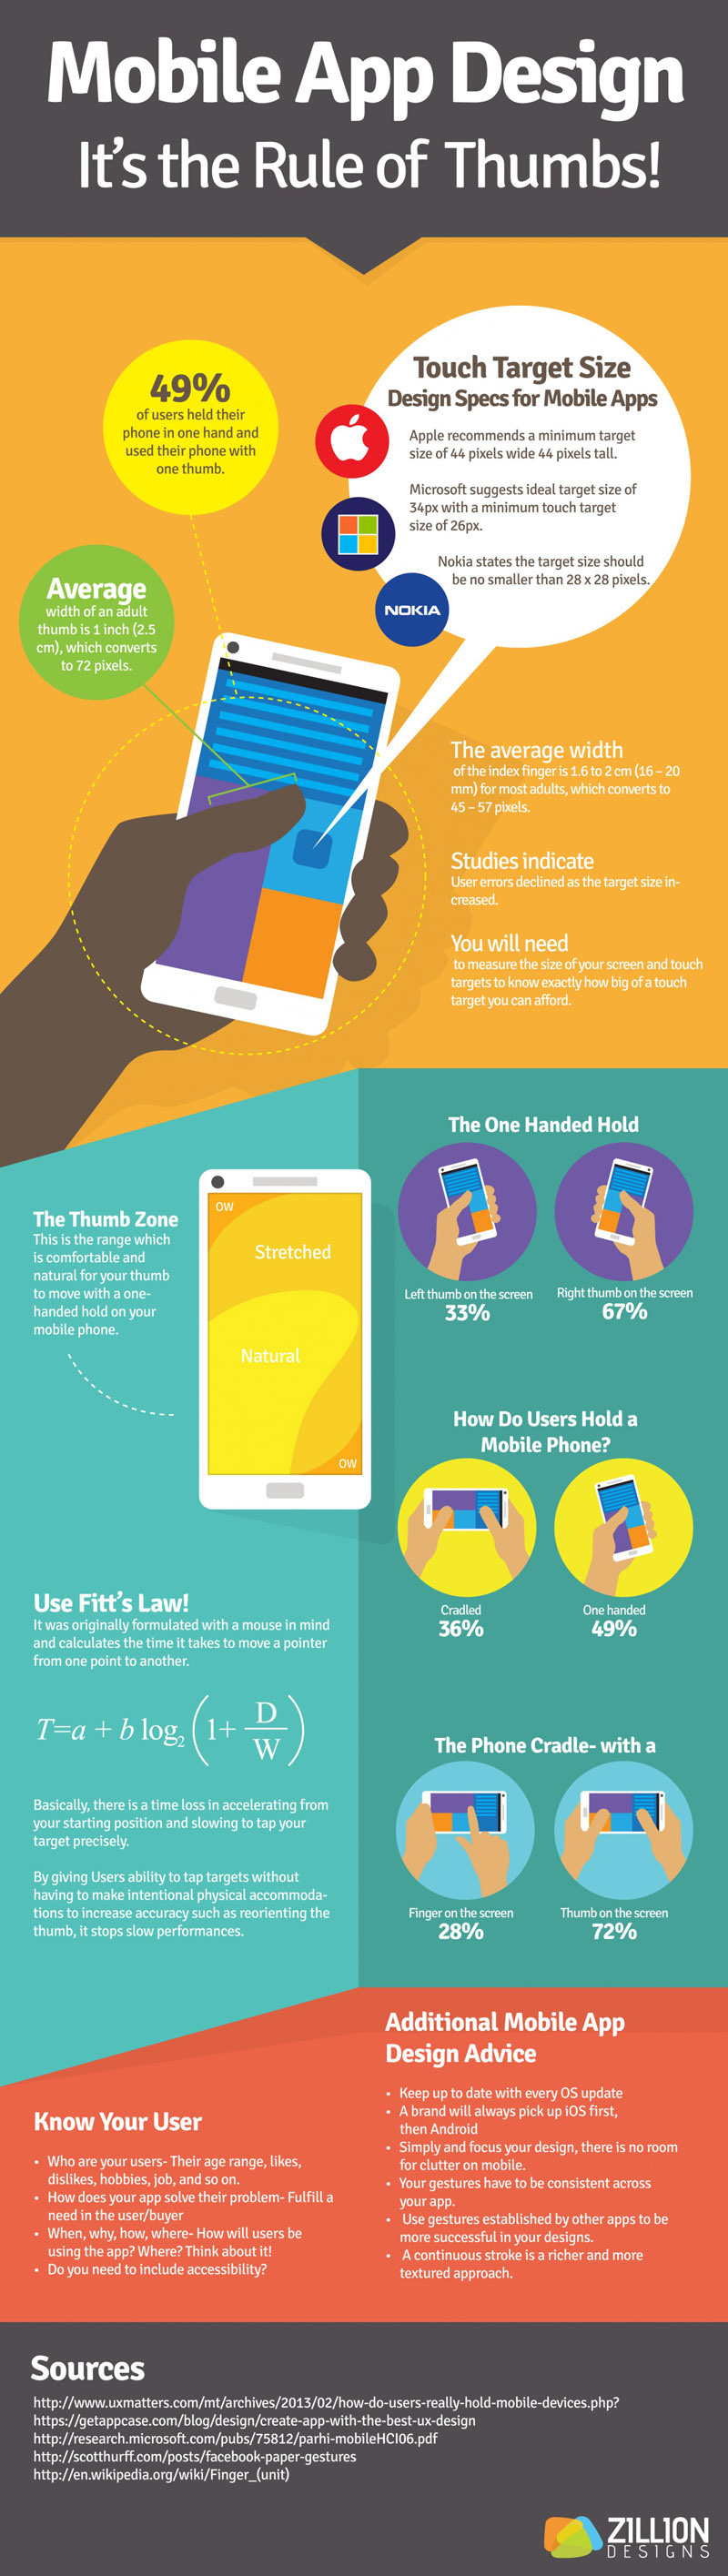 Mobile App Design- It’s the Rule of Thumbs! [Infographic]